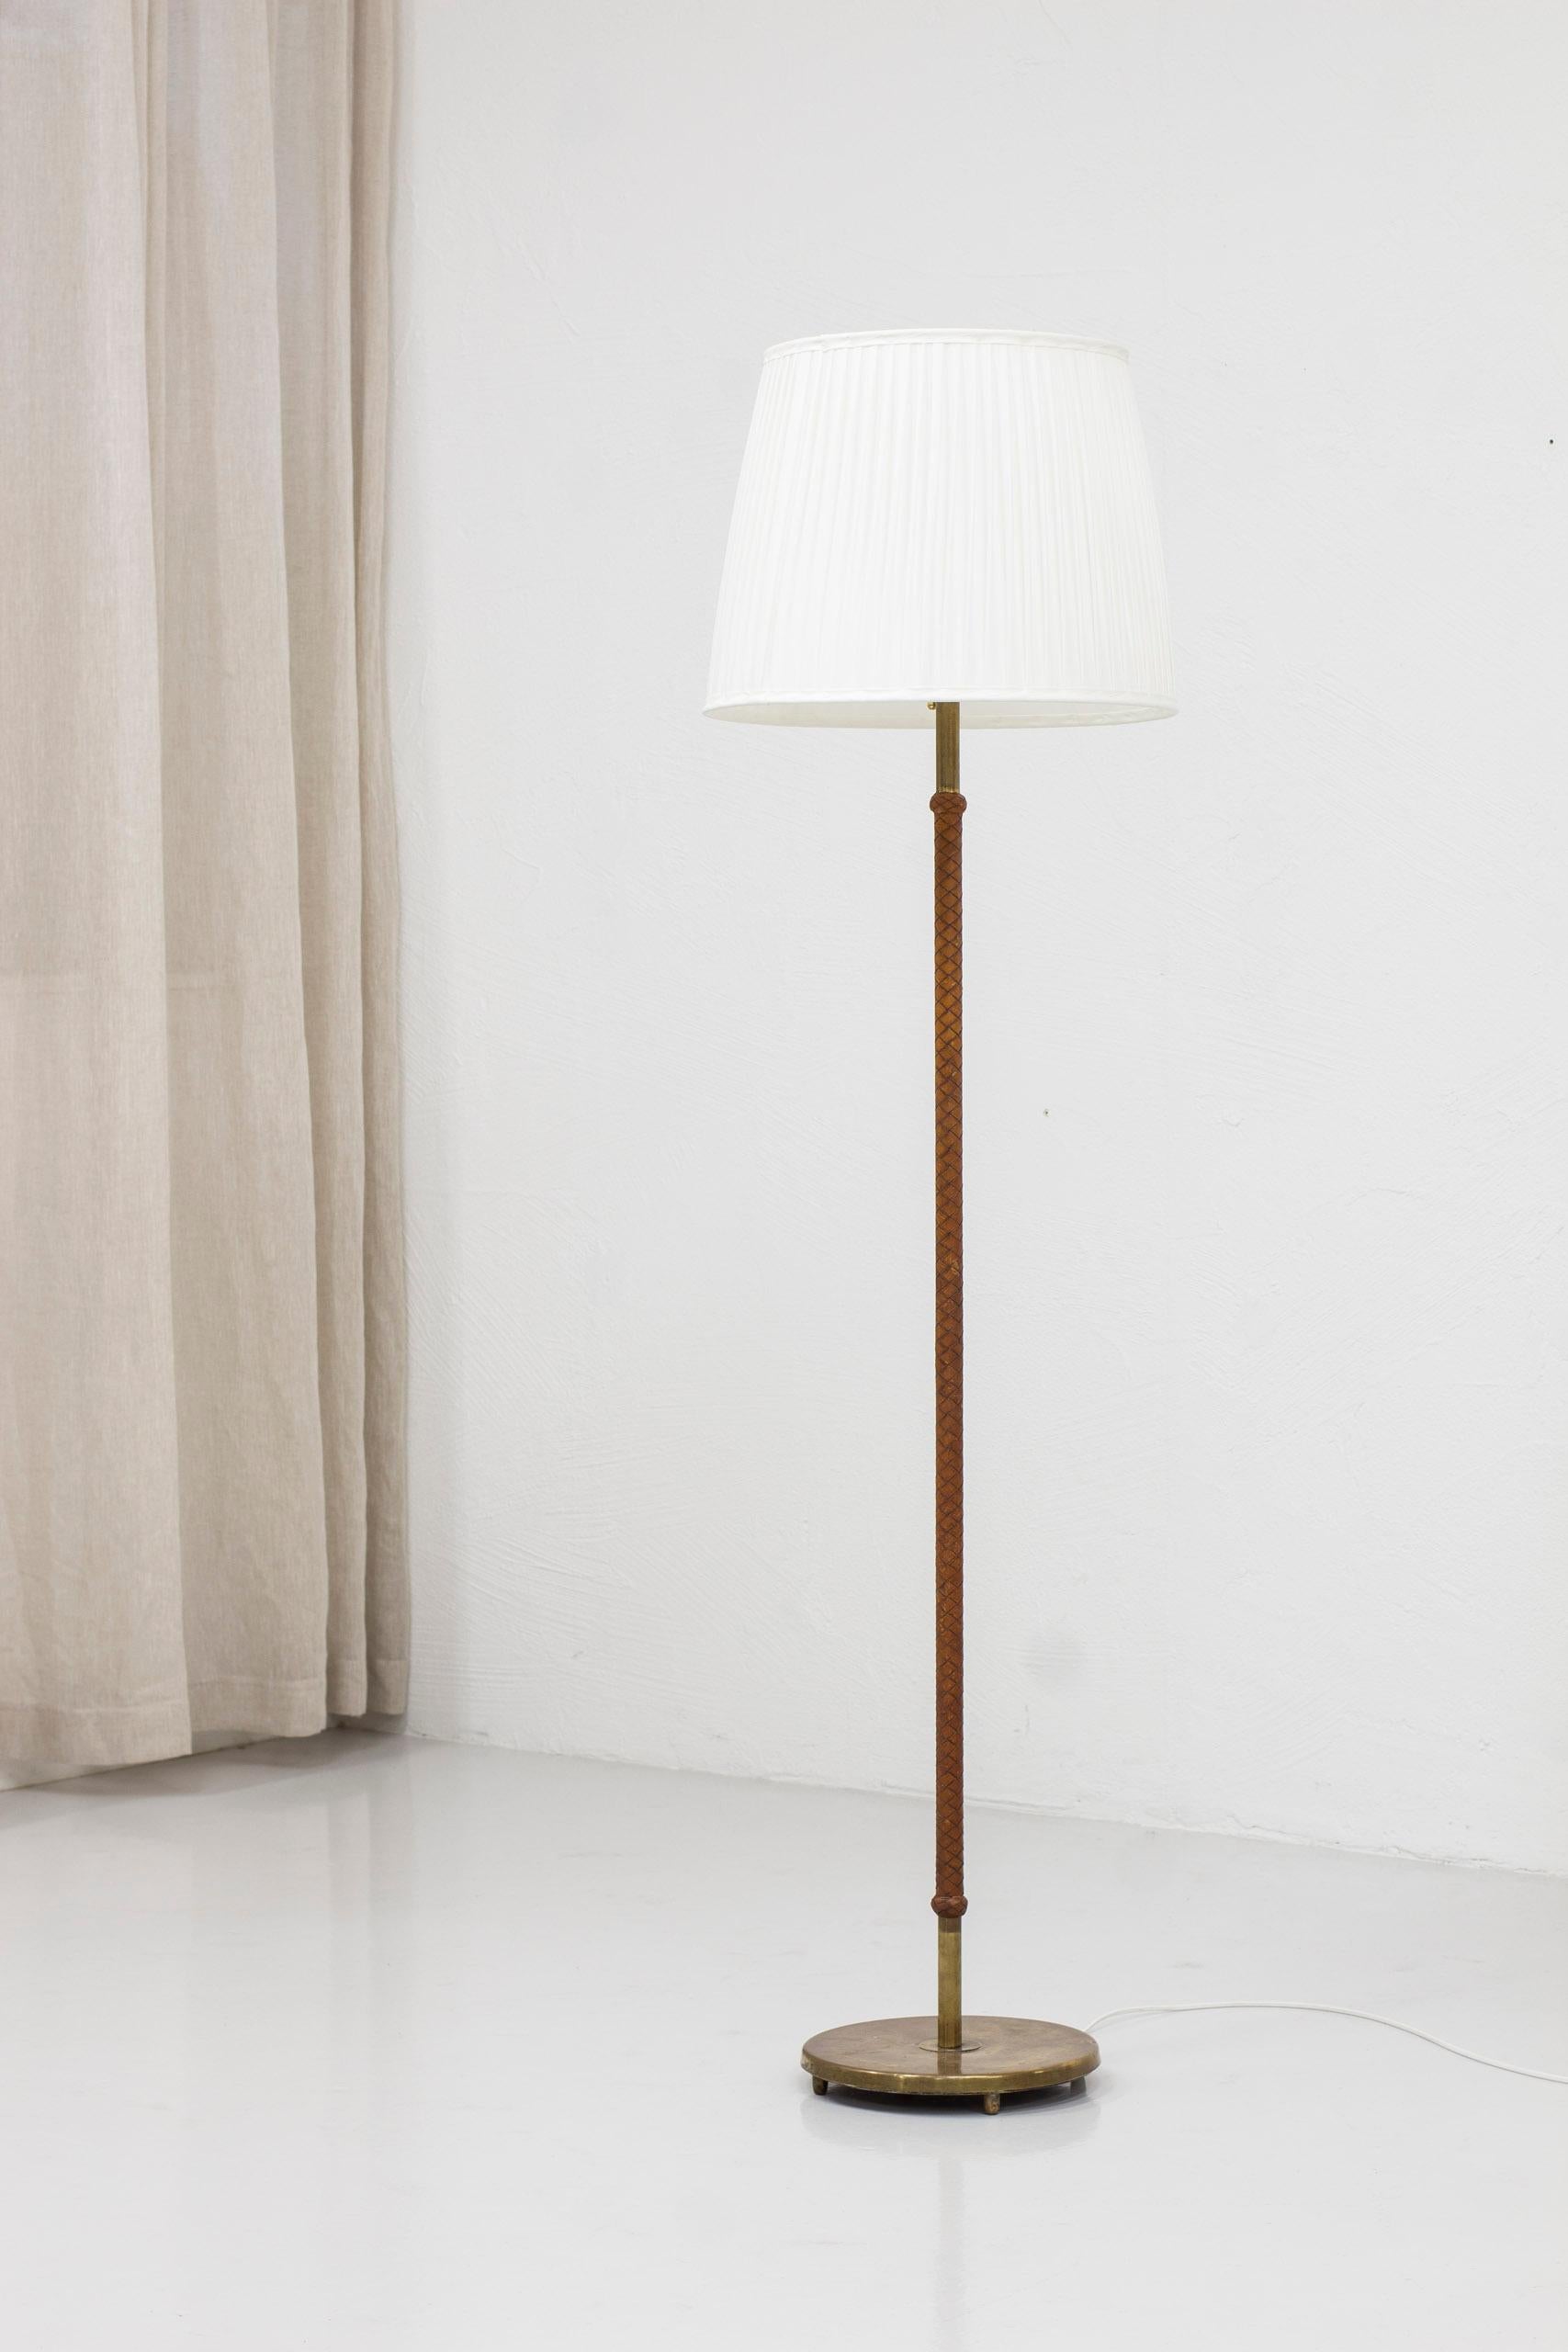 Floor lamp designed and produced in Sweden during the 1940-50s. Made from brass with original braided leather wrapping on the stem. The original lamp shade has been re-sewn with off white chintz fabric to replicate the original. Light switch on the